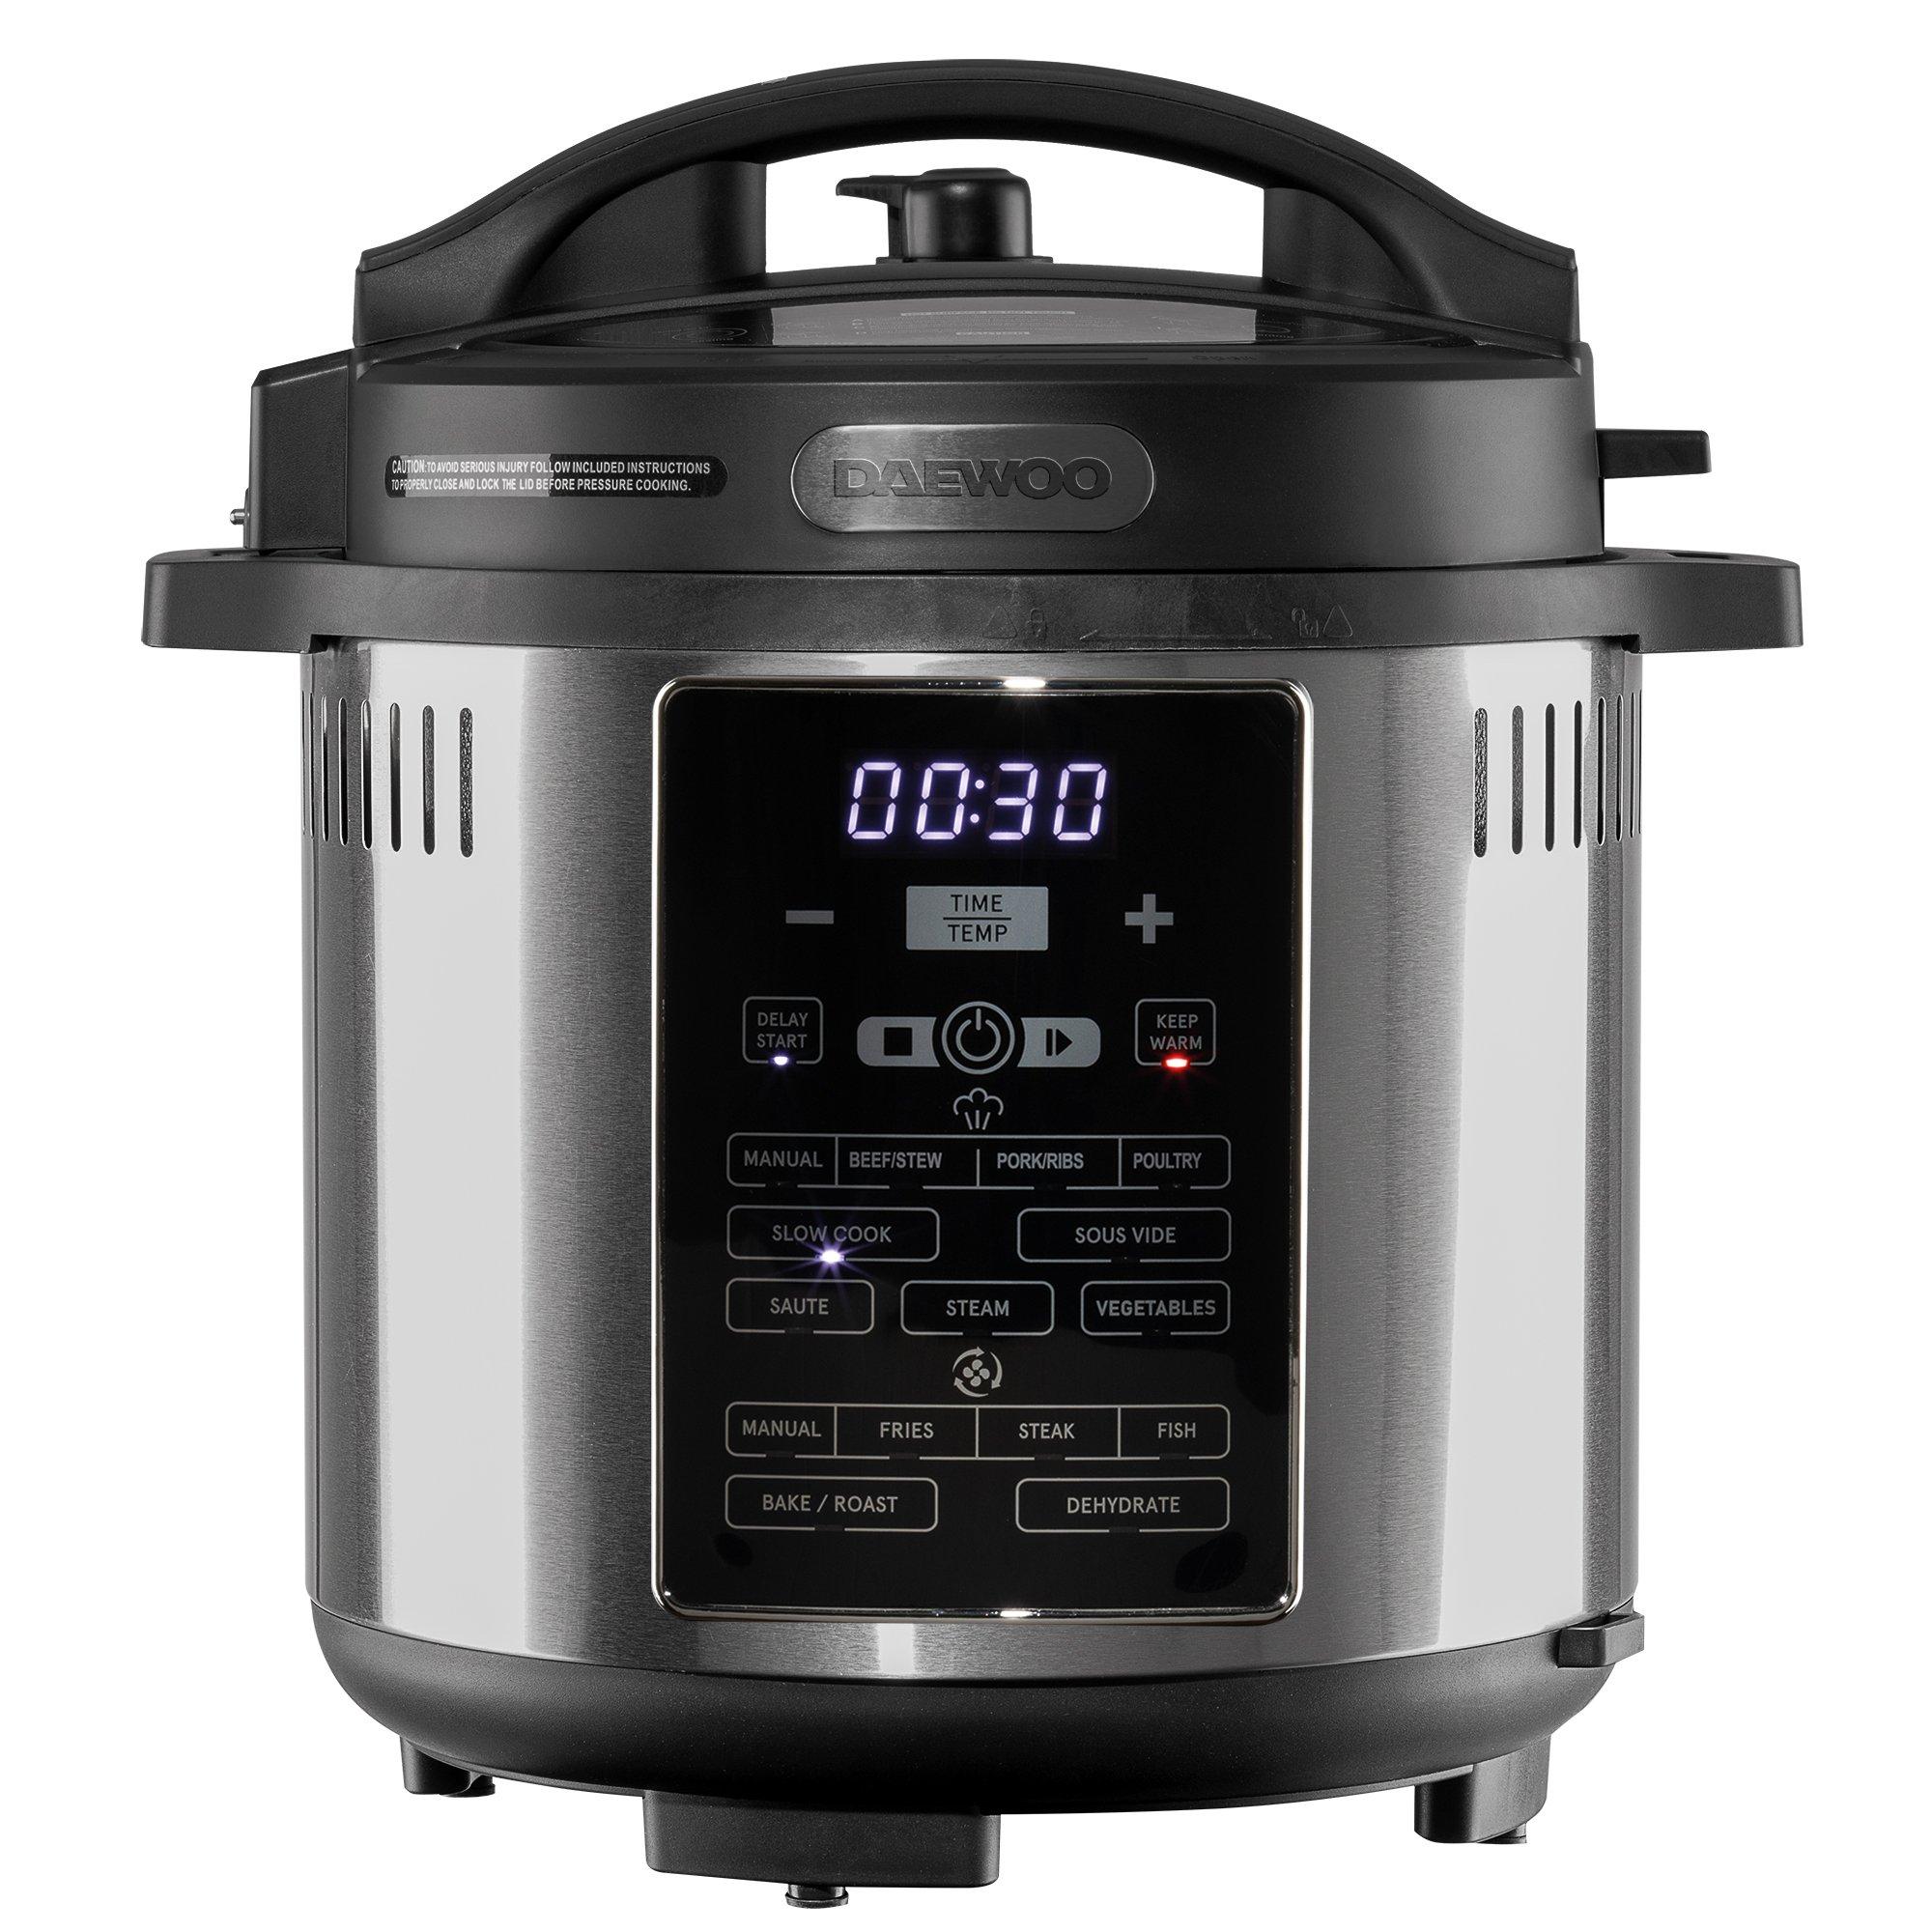 Stainless Steel 13-in-1 Multi Pressure Cooker Air Fryer All in One 6L